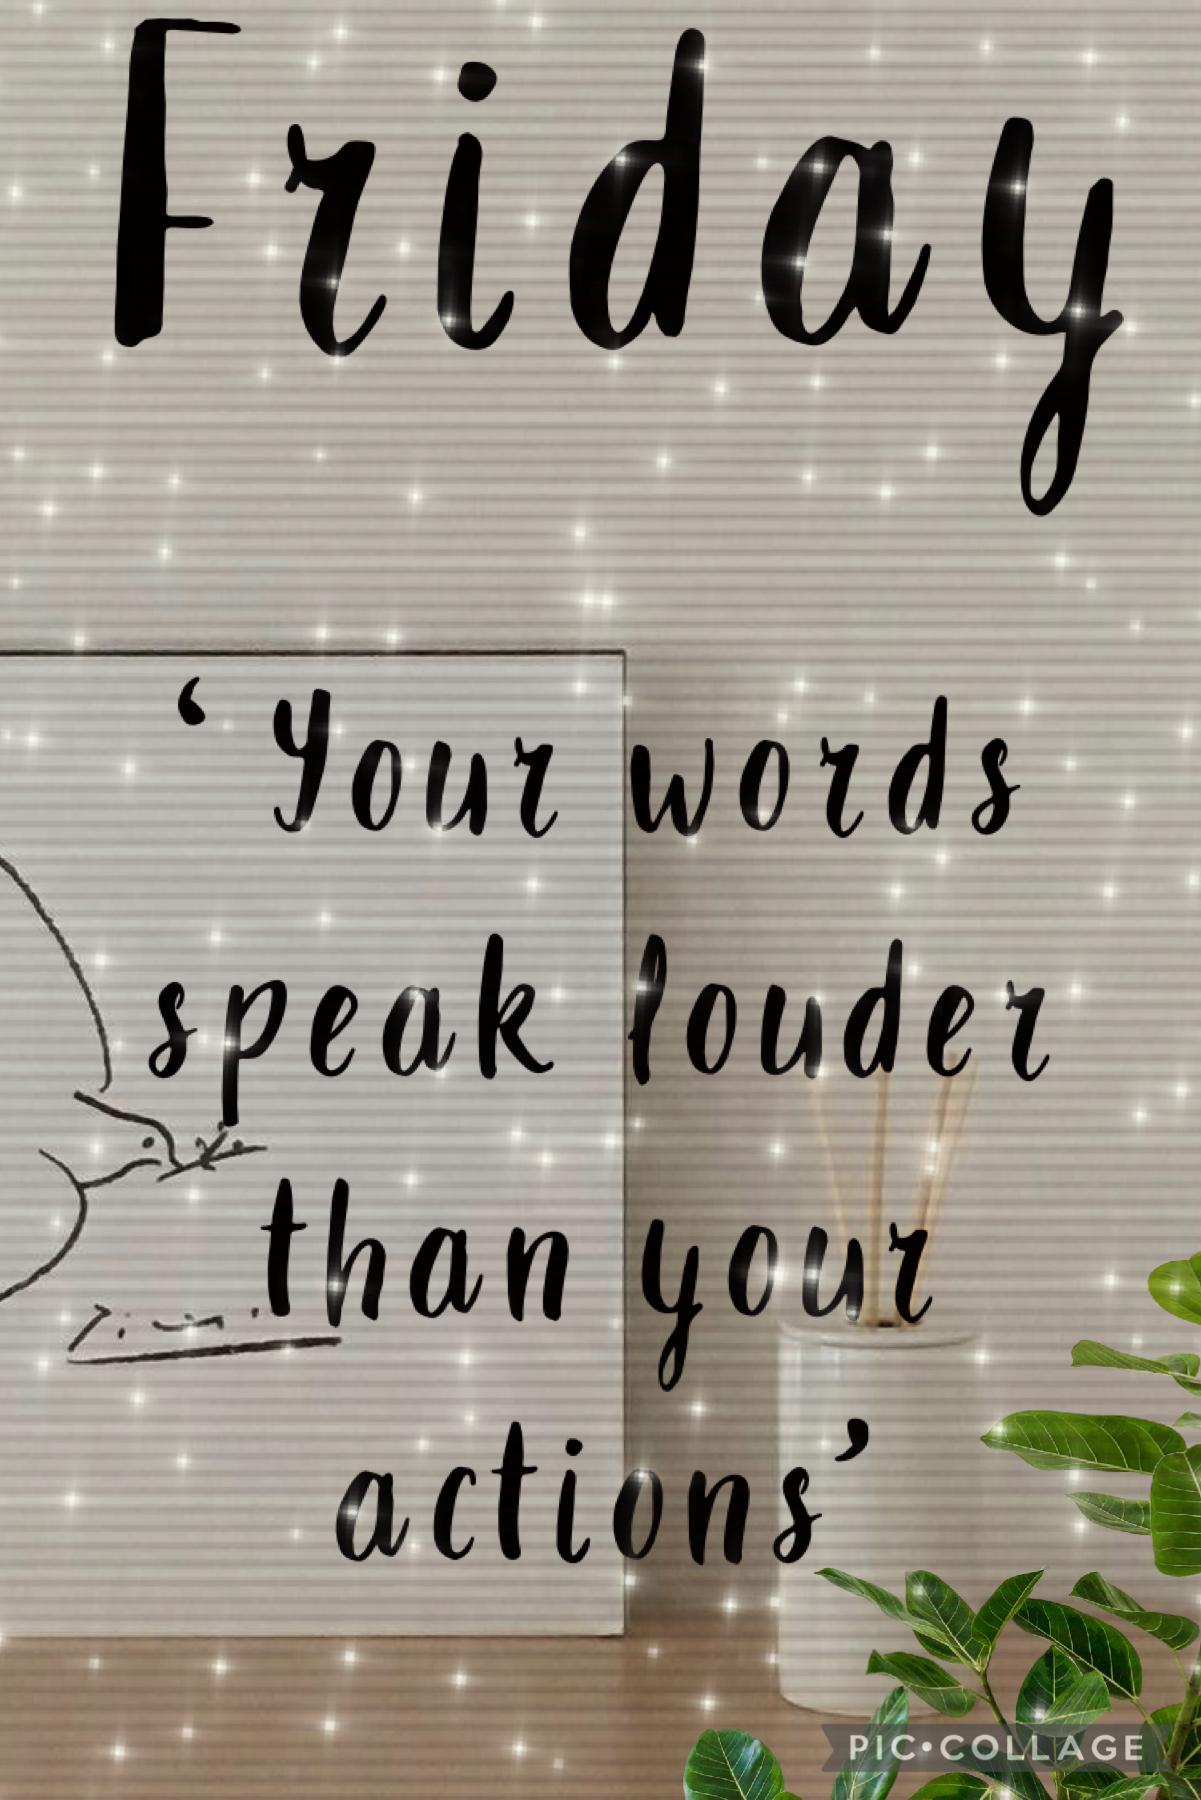 I hope everyone had a great week!! I was super busy and couldn’t post much!! Sorry about that! Make sure you treat others the same way you would want to be treated!! And just know that you could say one things to someone and it could speak louder than you